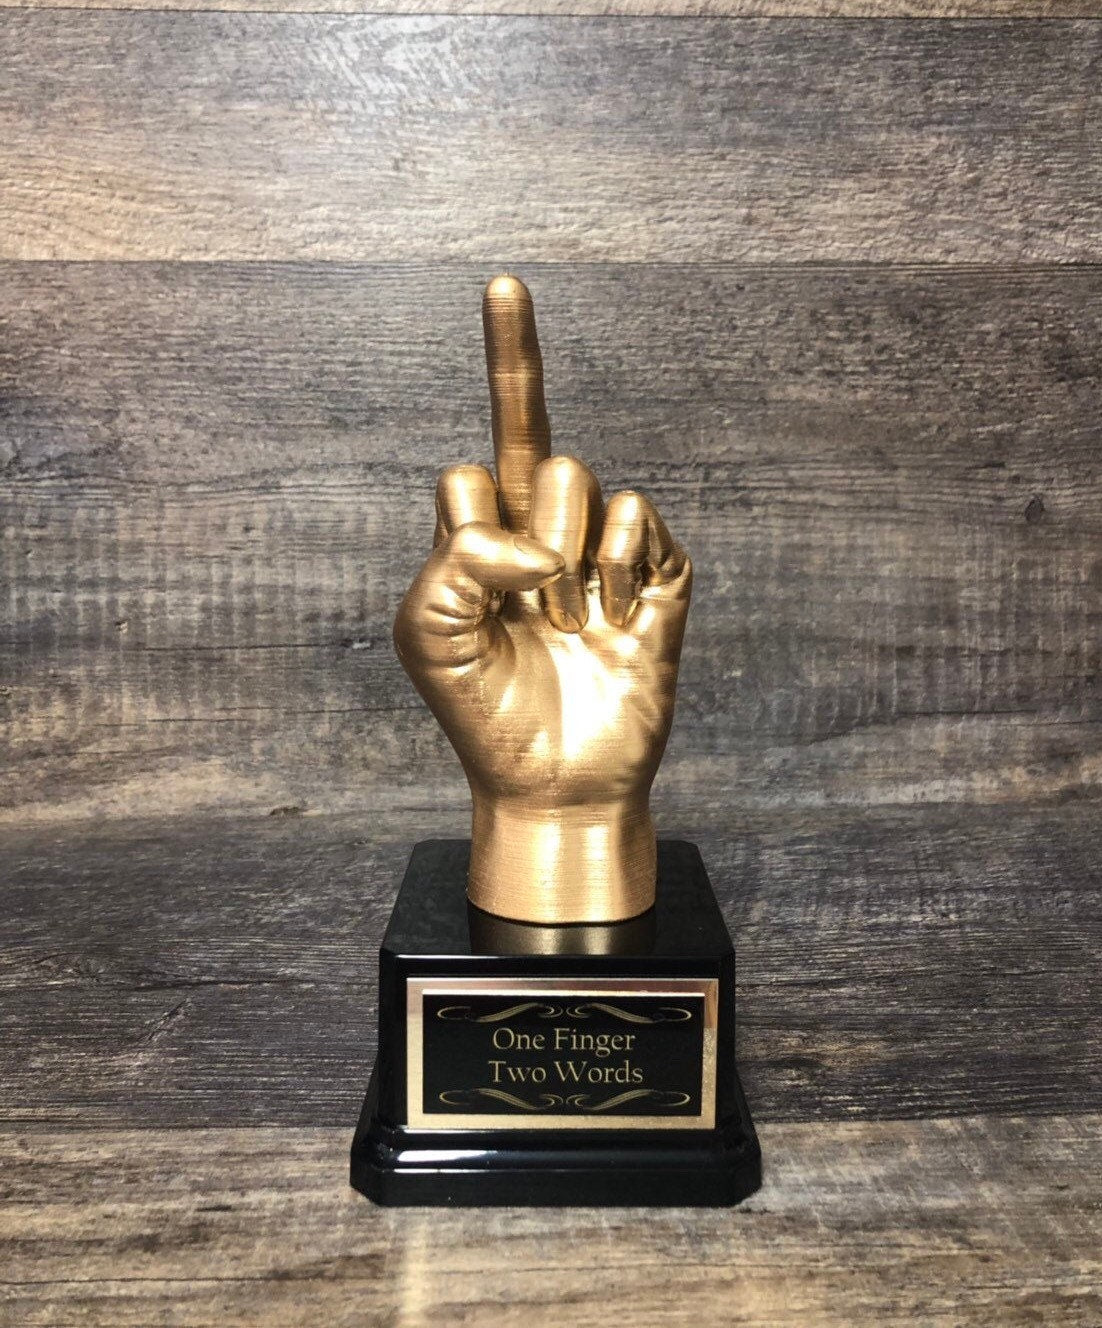 Fishing Trophy Best Fish Story Funny Trophy Middle Finger Fishing Gag Gift Adult Humor Birthday Gift F*ck You Trophy One Finger Two Words